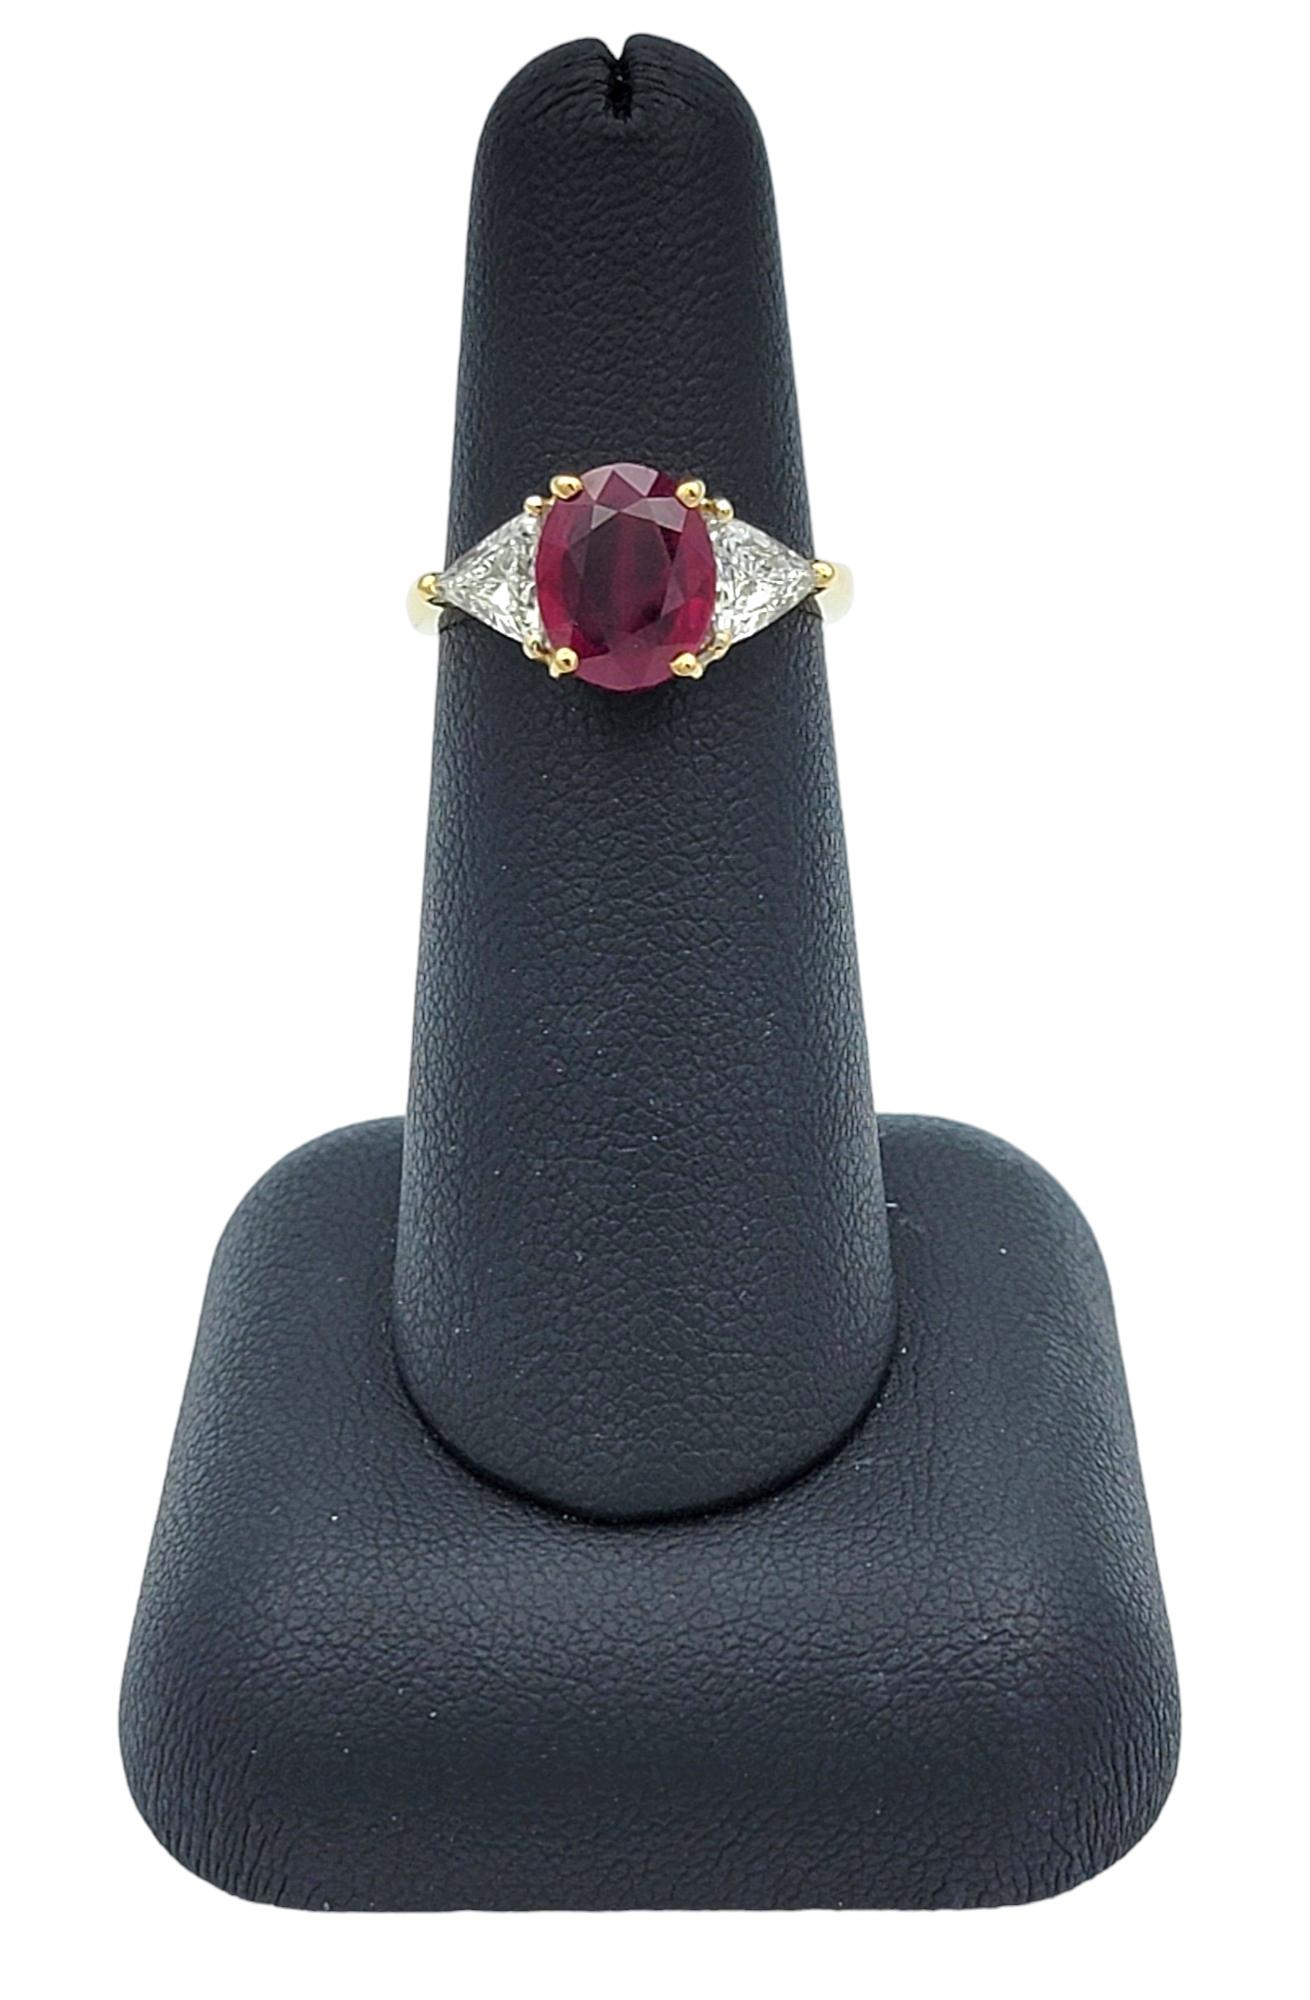 Rare Natural Oval Cut Burma Ruby and Trillion Diamond Ring 18 Karat Yellow Gold For Sale 5